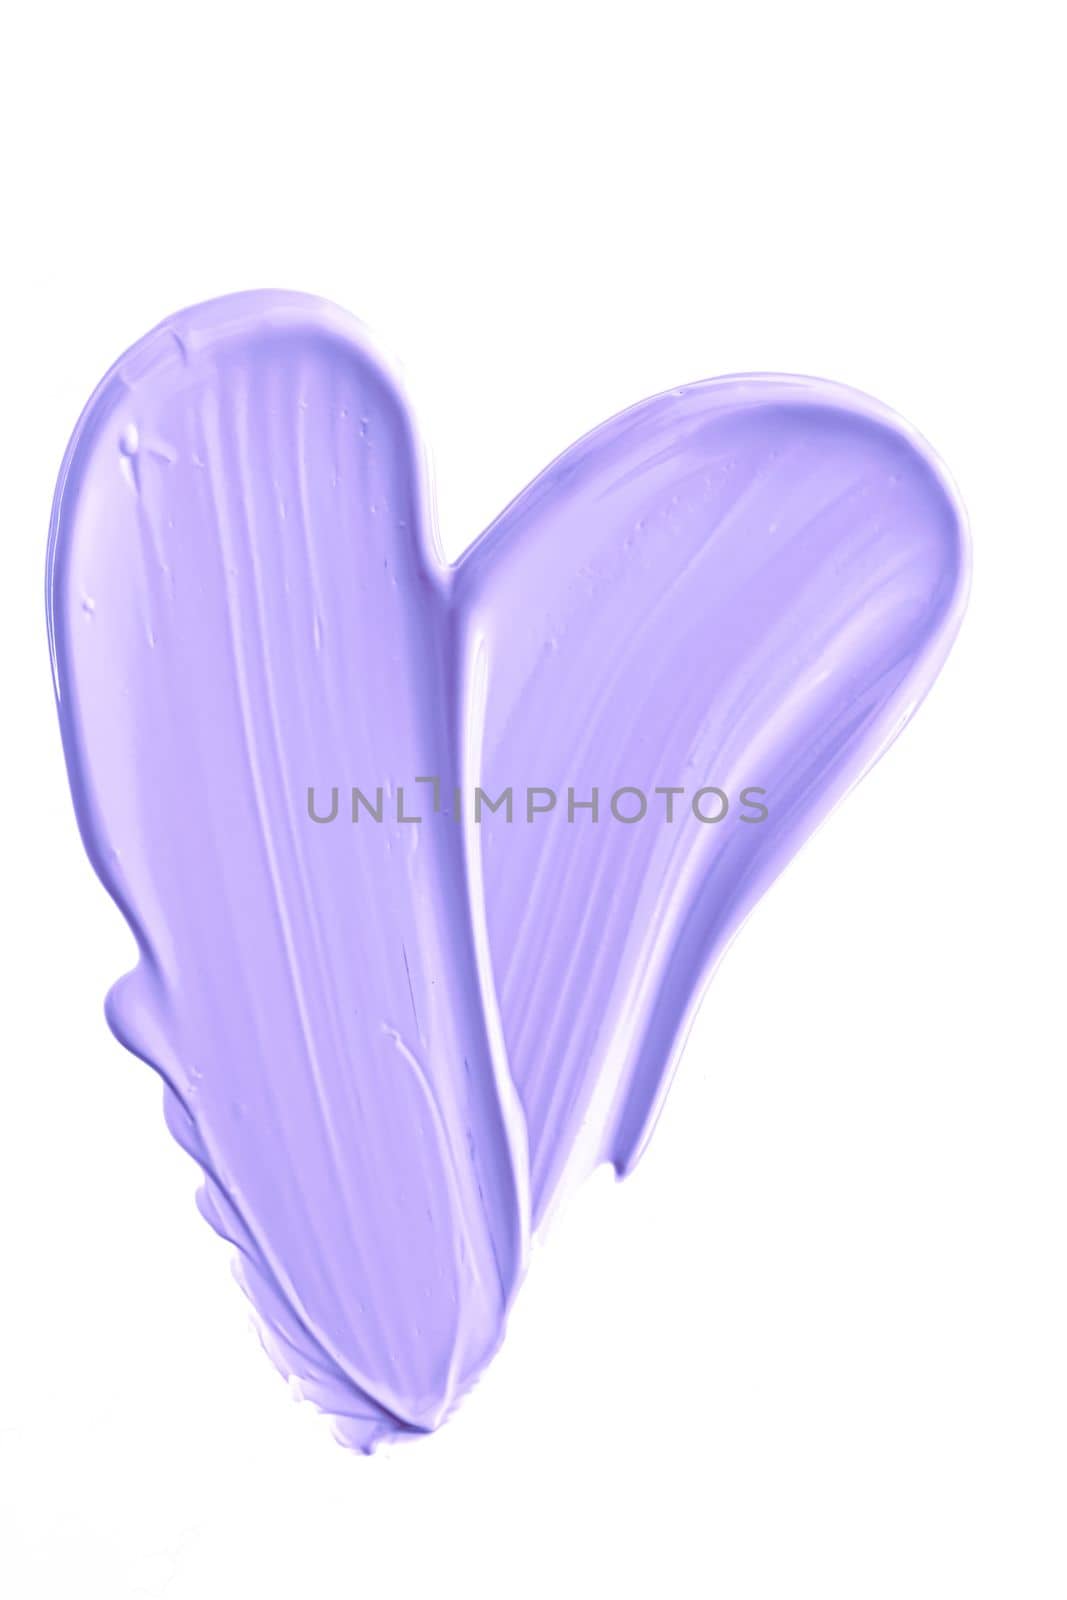 Pastel purple beauty swatch, skincare and makeup cosmetic product sample texture isolated on white background, make-up smudge, cream cosmetics smear or paint brush stroke closeup